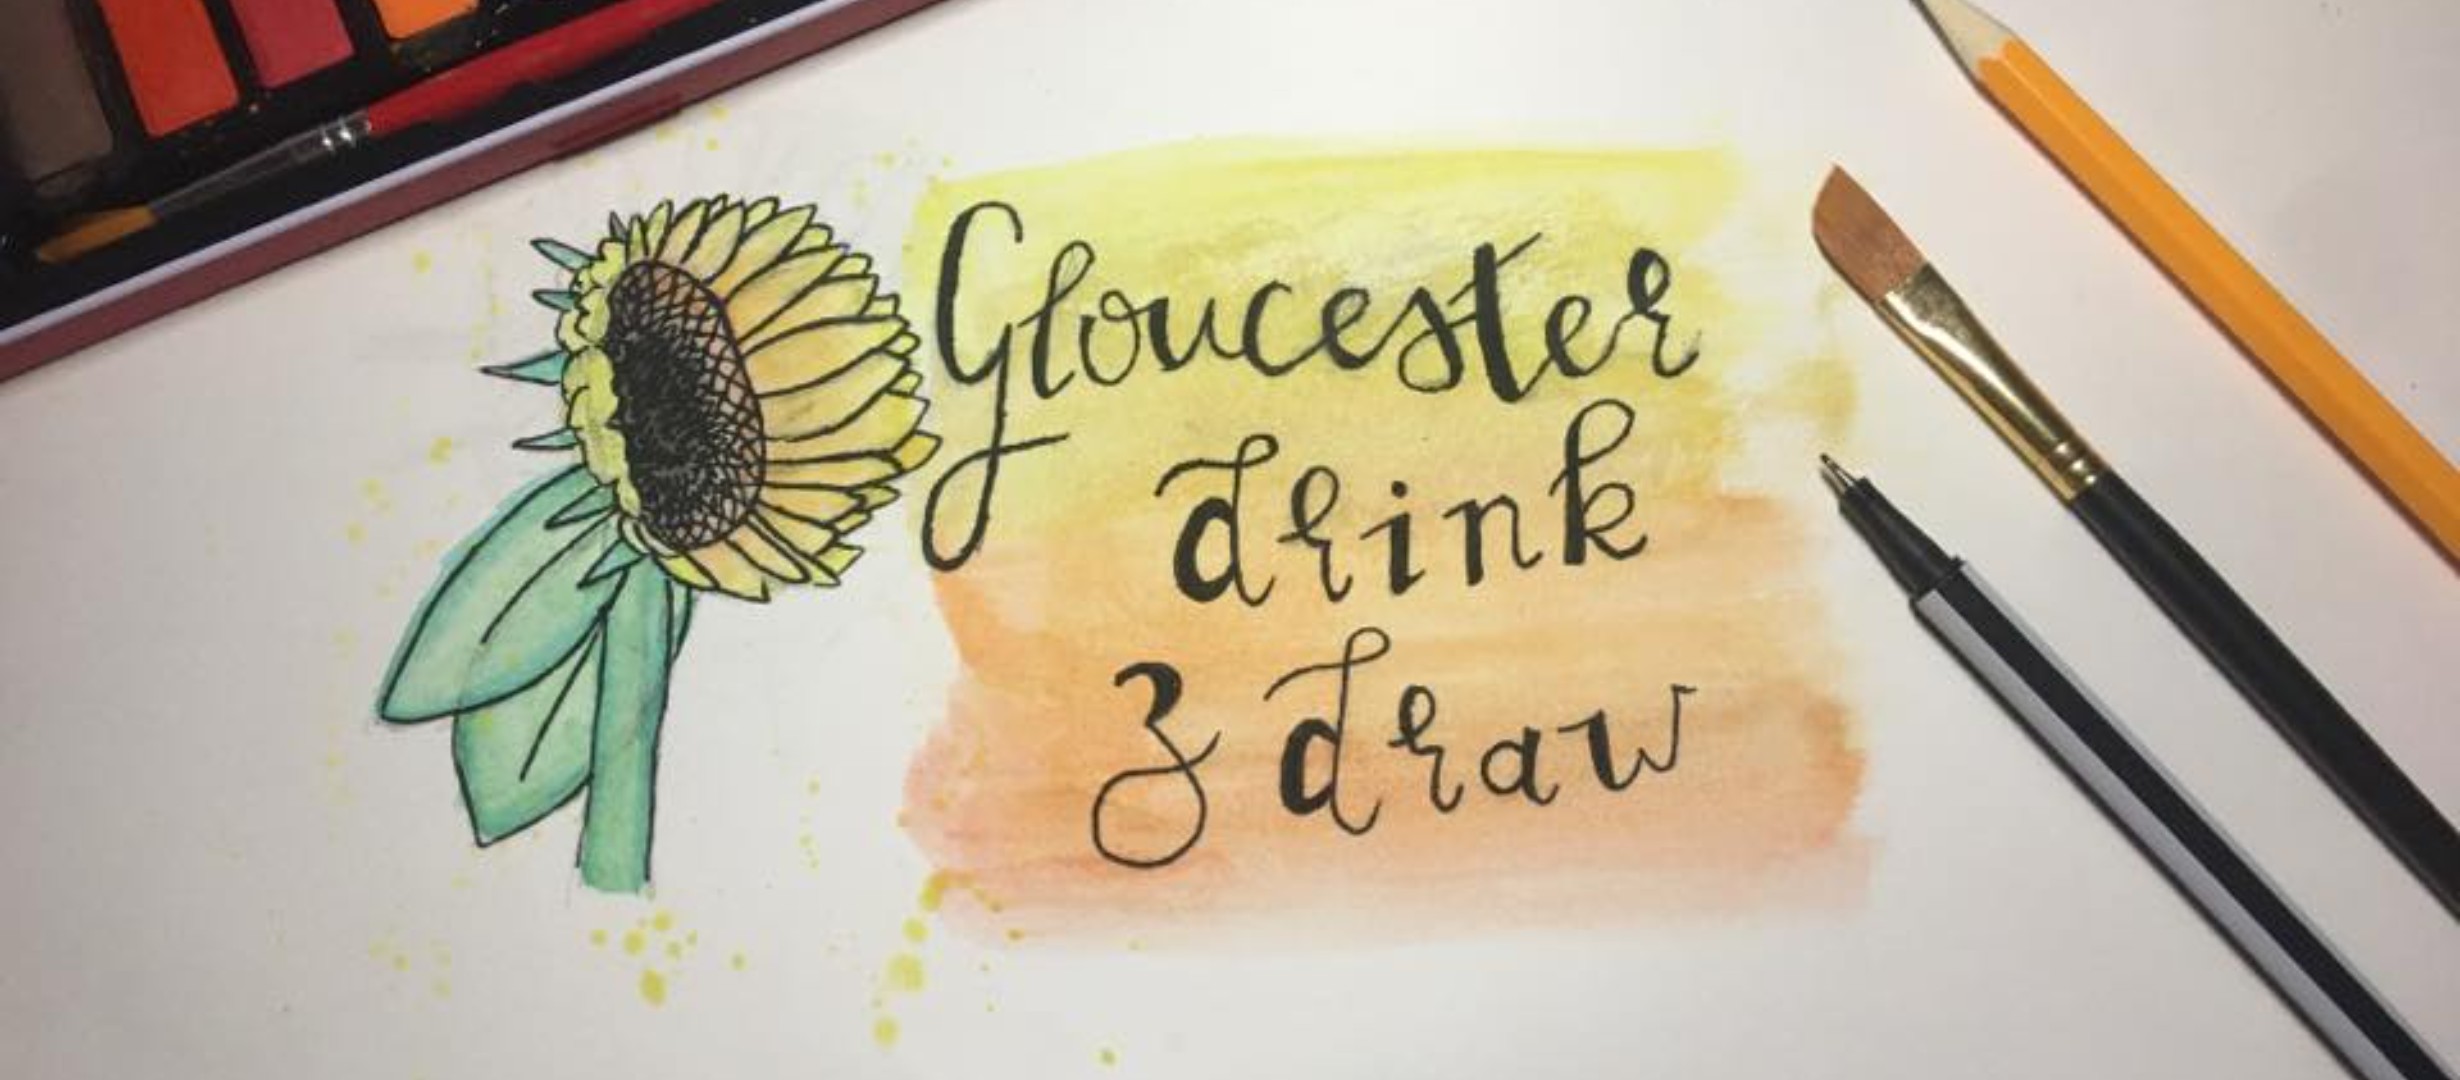 text 'Gloucester drink & draw' on sketch paper with pencil, pen and paintbrush